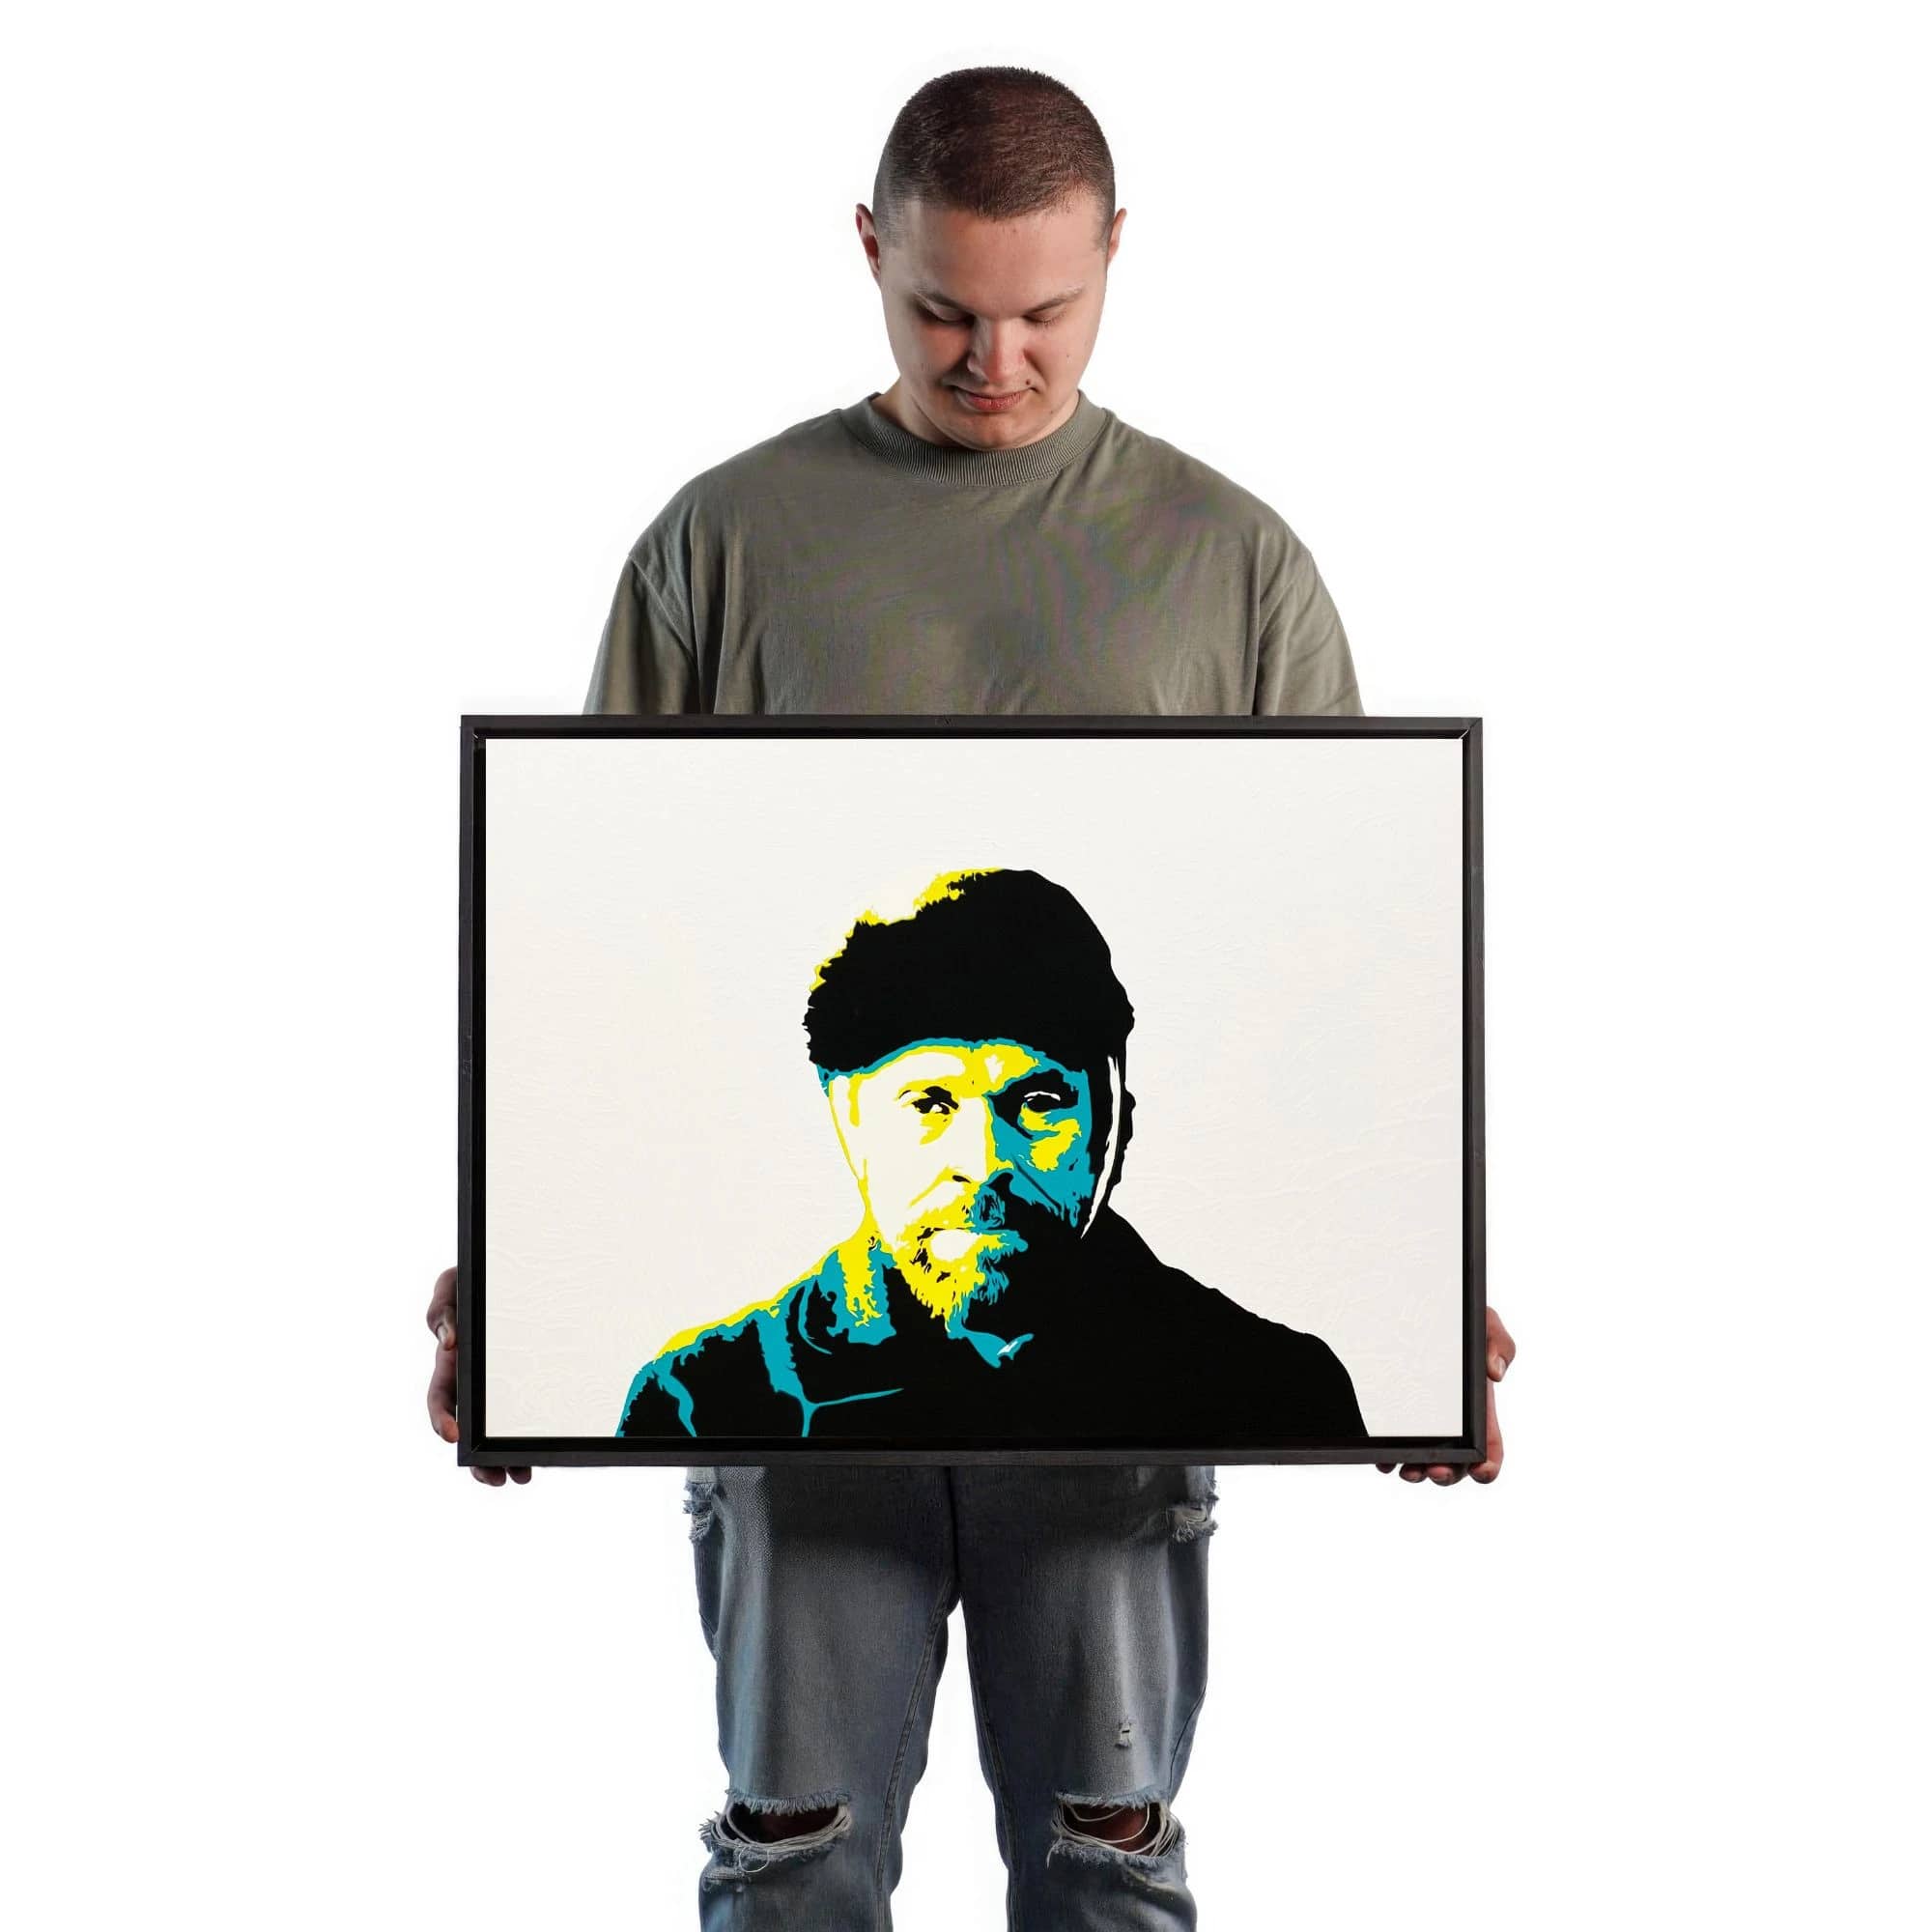 Artist holding portraits of Vincent Van Gogh: on the left, a 50x70 centimeter stencil art. The picture is being used as a size reference, comparing it to the size of a real human body.